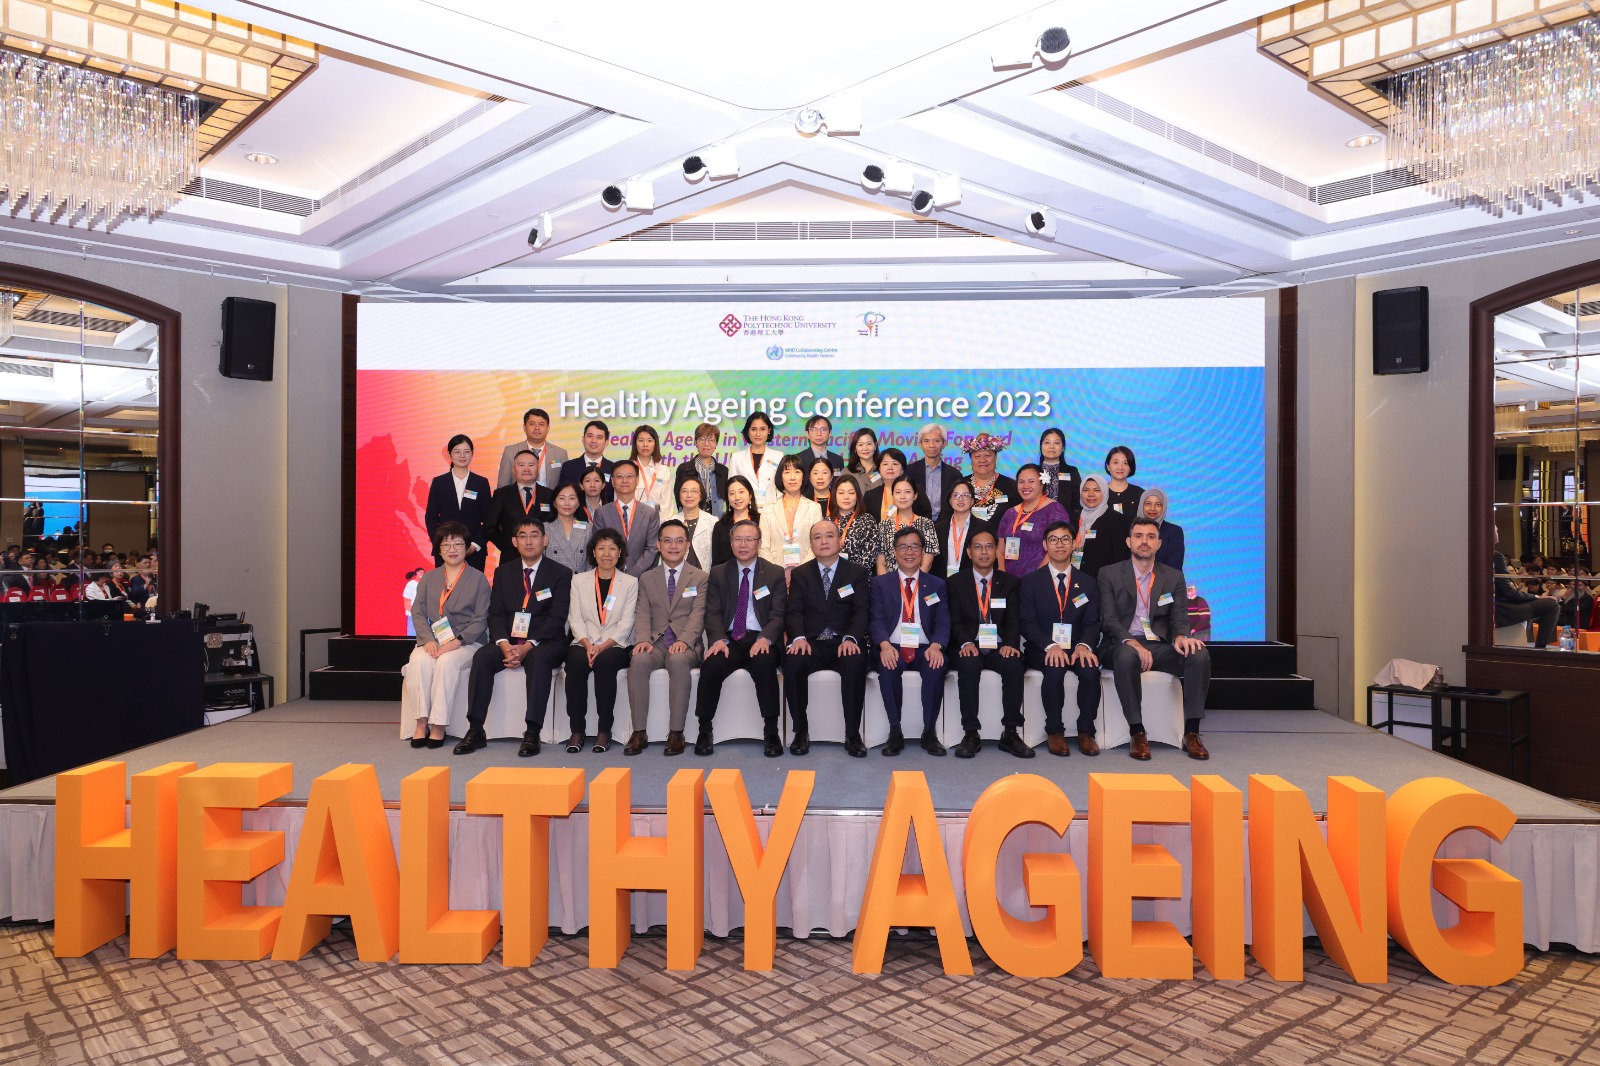 The Organizing Committee of the Healthy Ageing Conference 2023, along with representatives from the Western Pacific region of the World Health Organization, gathered to address the emerging trends and challenges related to population ageing.